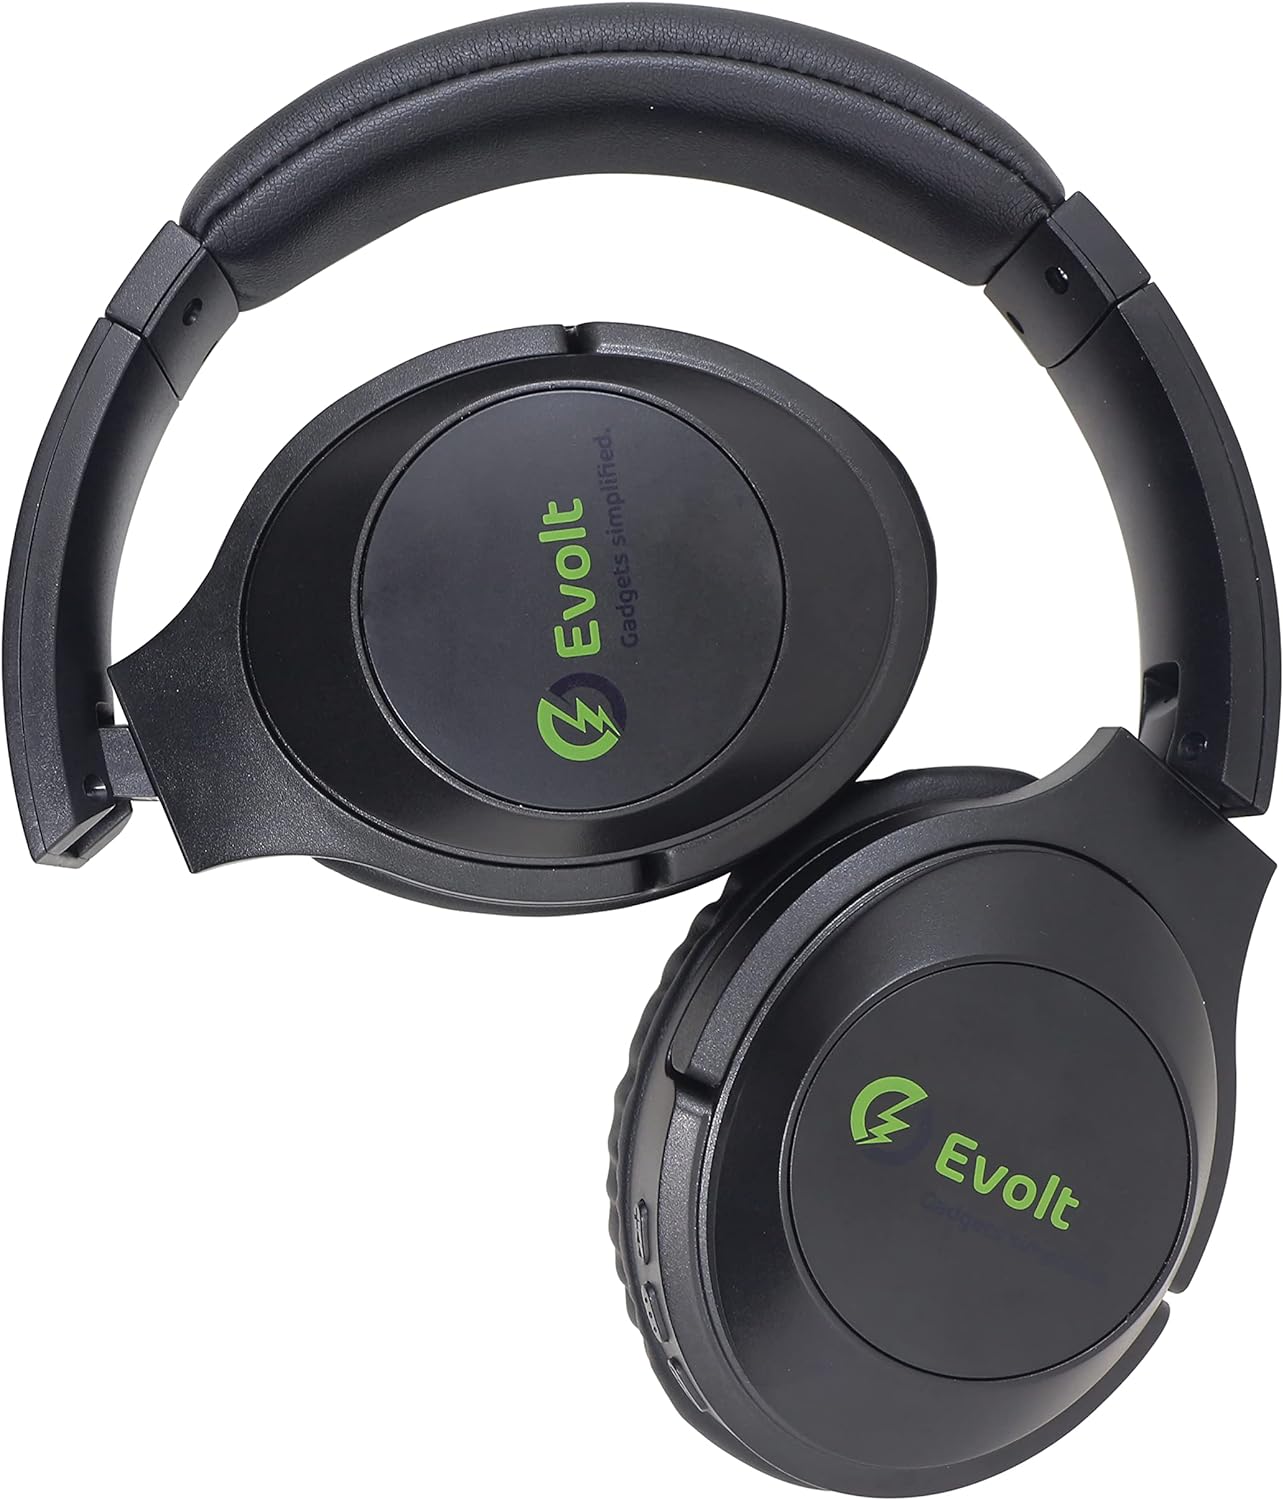 Evolt BH-100 Over-ear Wireless Headphones with AUX-In, Comfortable soft-paded finish, features 40mm speaker drivers, Multi-foldable design, upto 15 hours of music time